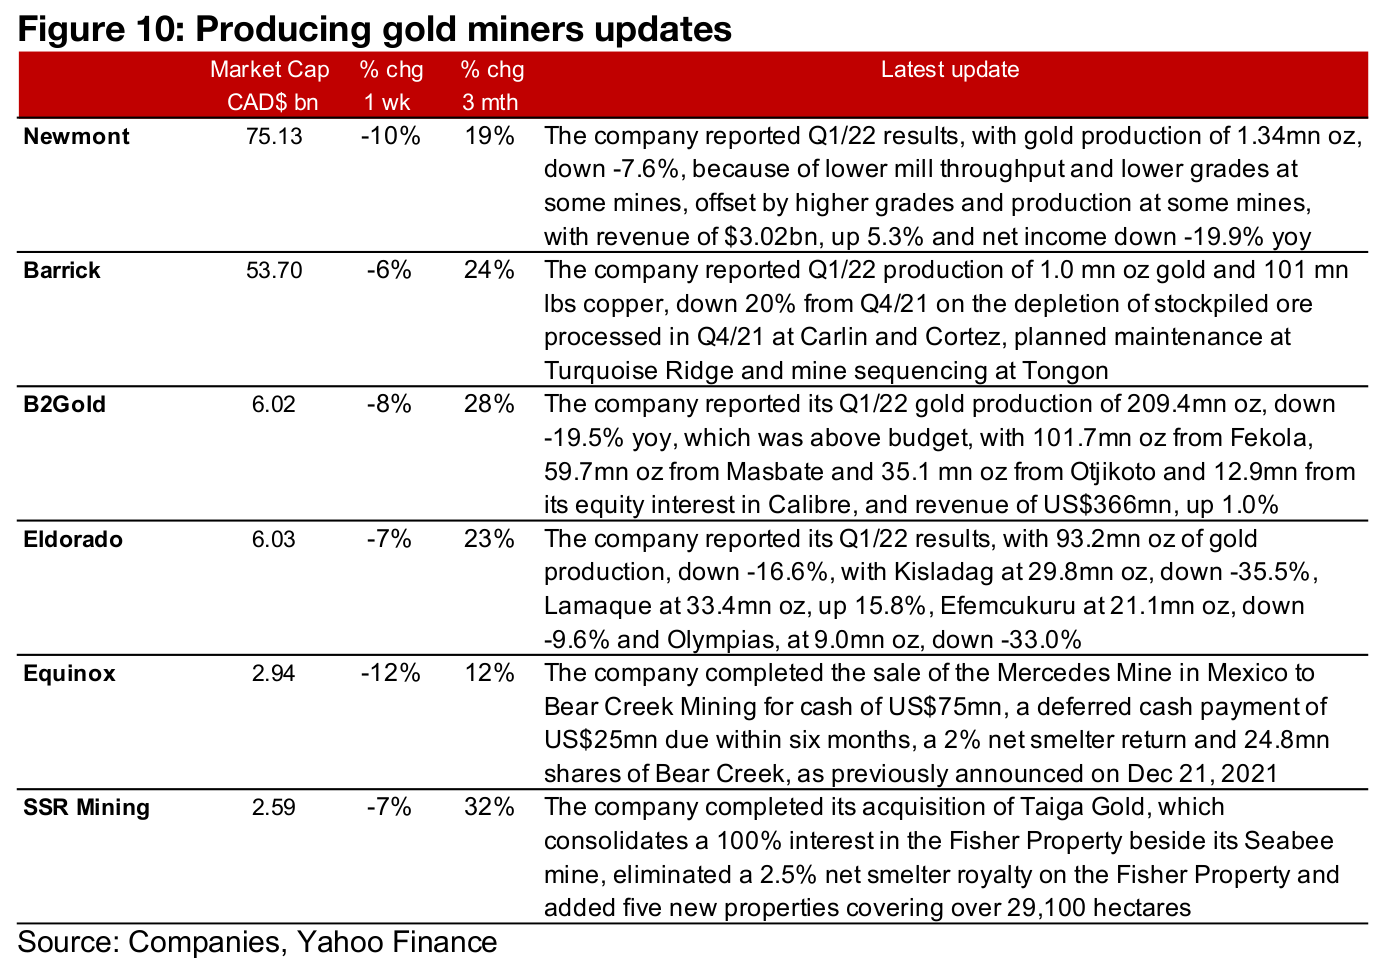 Producers and Canadian juniors down on gold and equity decline